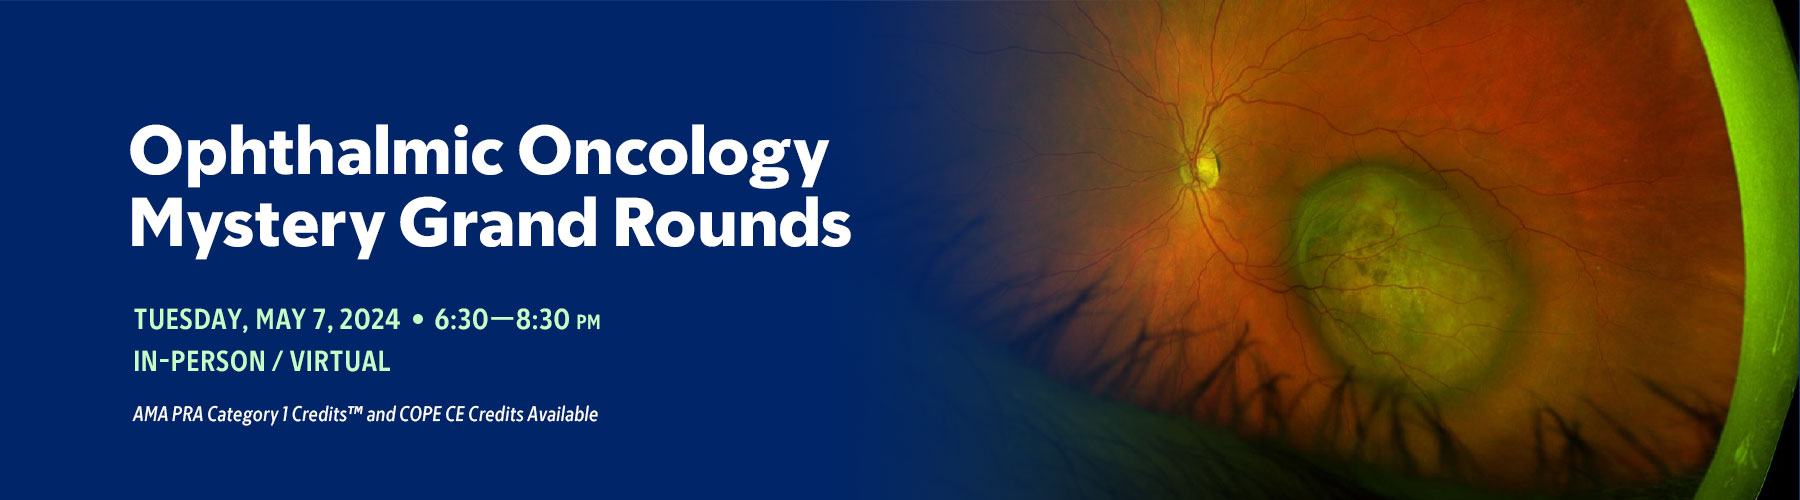 Ophthalmic Oncology Mystery Grand Rounds Banner